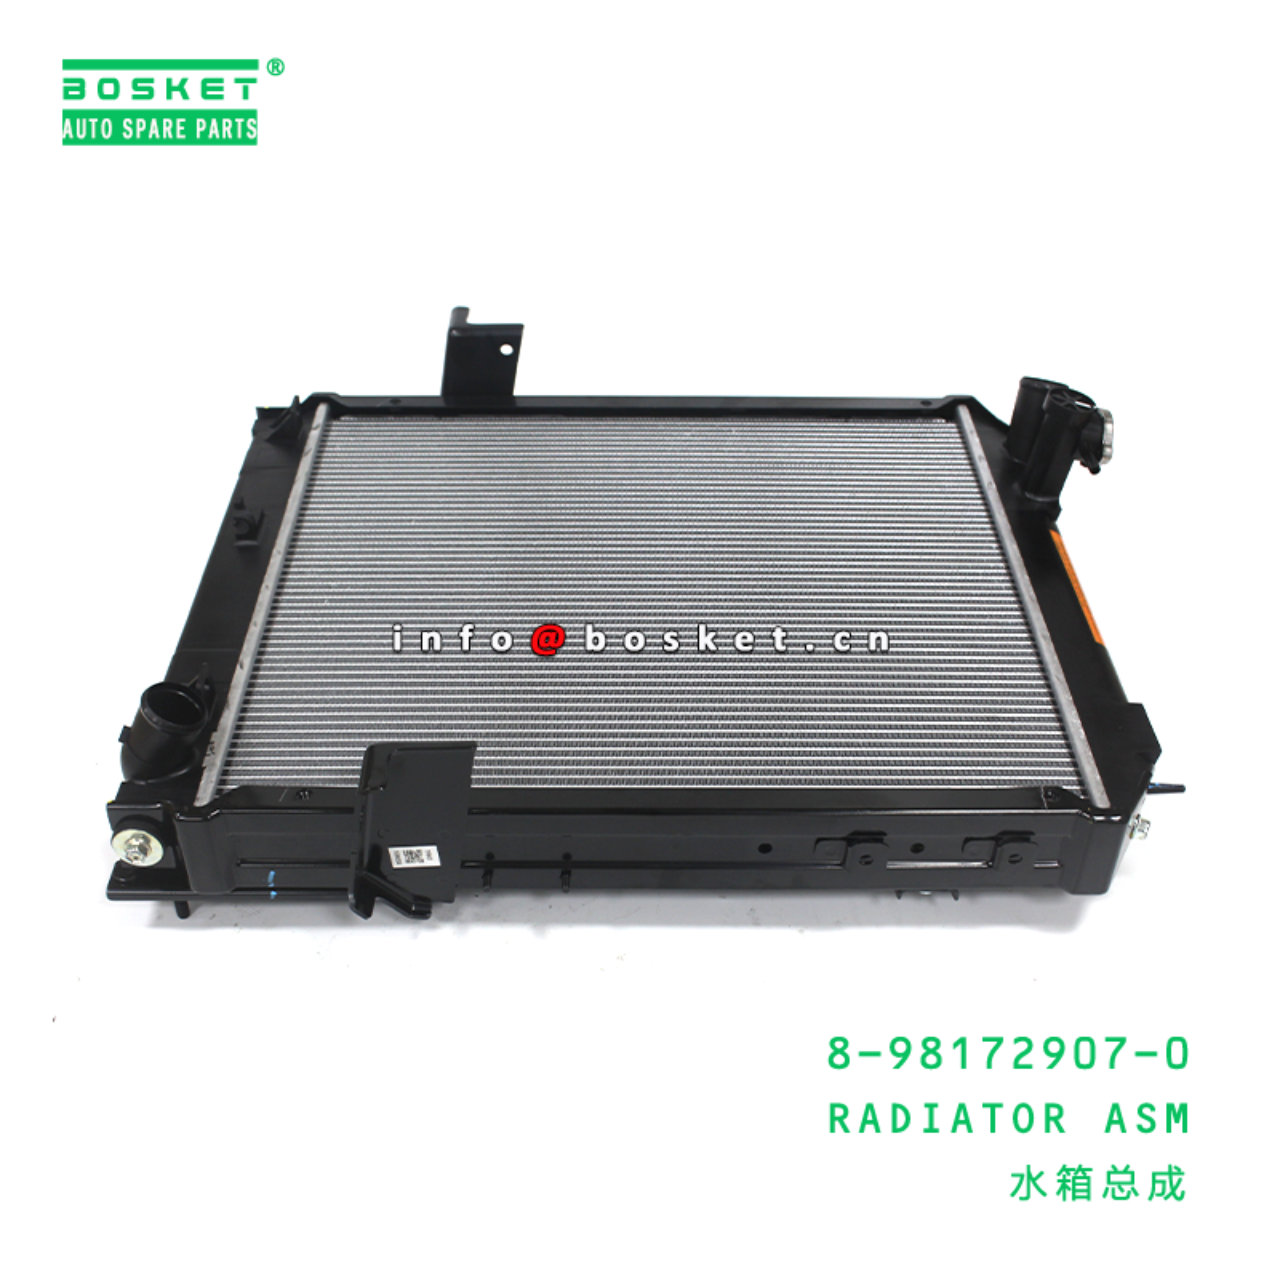 8-98172907-0 Radiator Assembly Suitable for ISUZU NLR NMR 8981729070